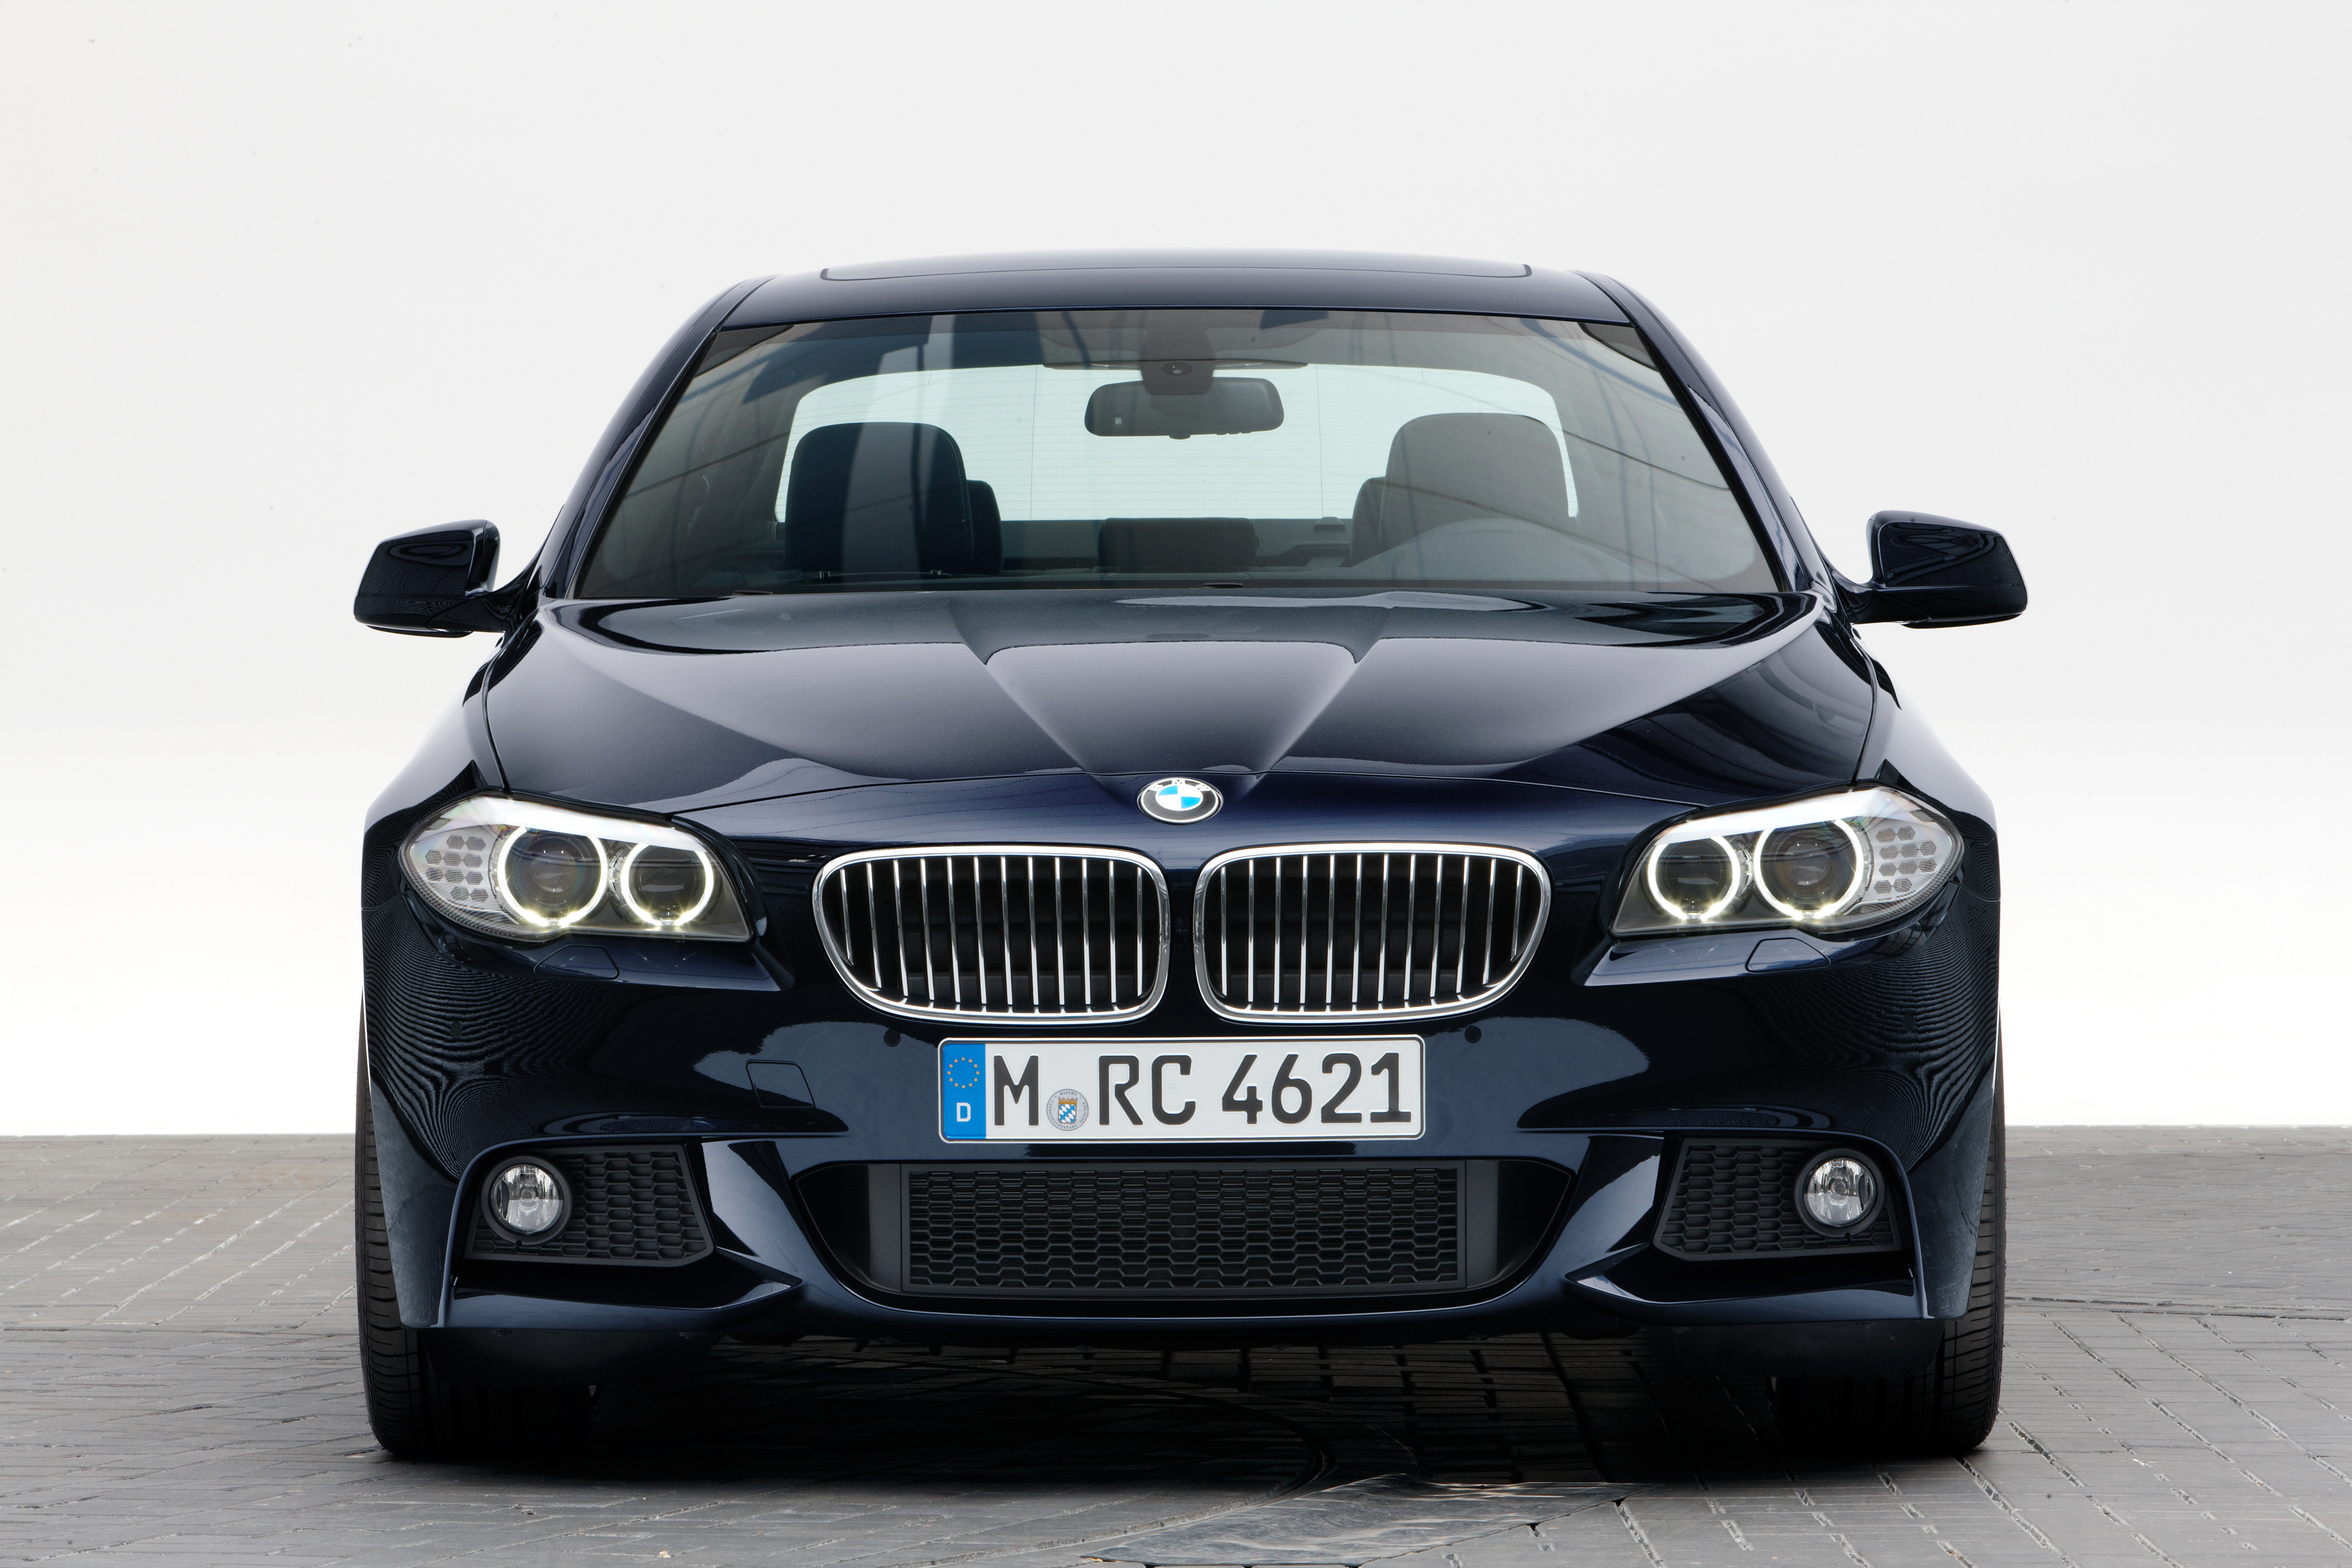 BMW’s M Division upgrades the M packages from September